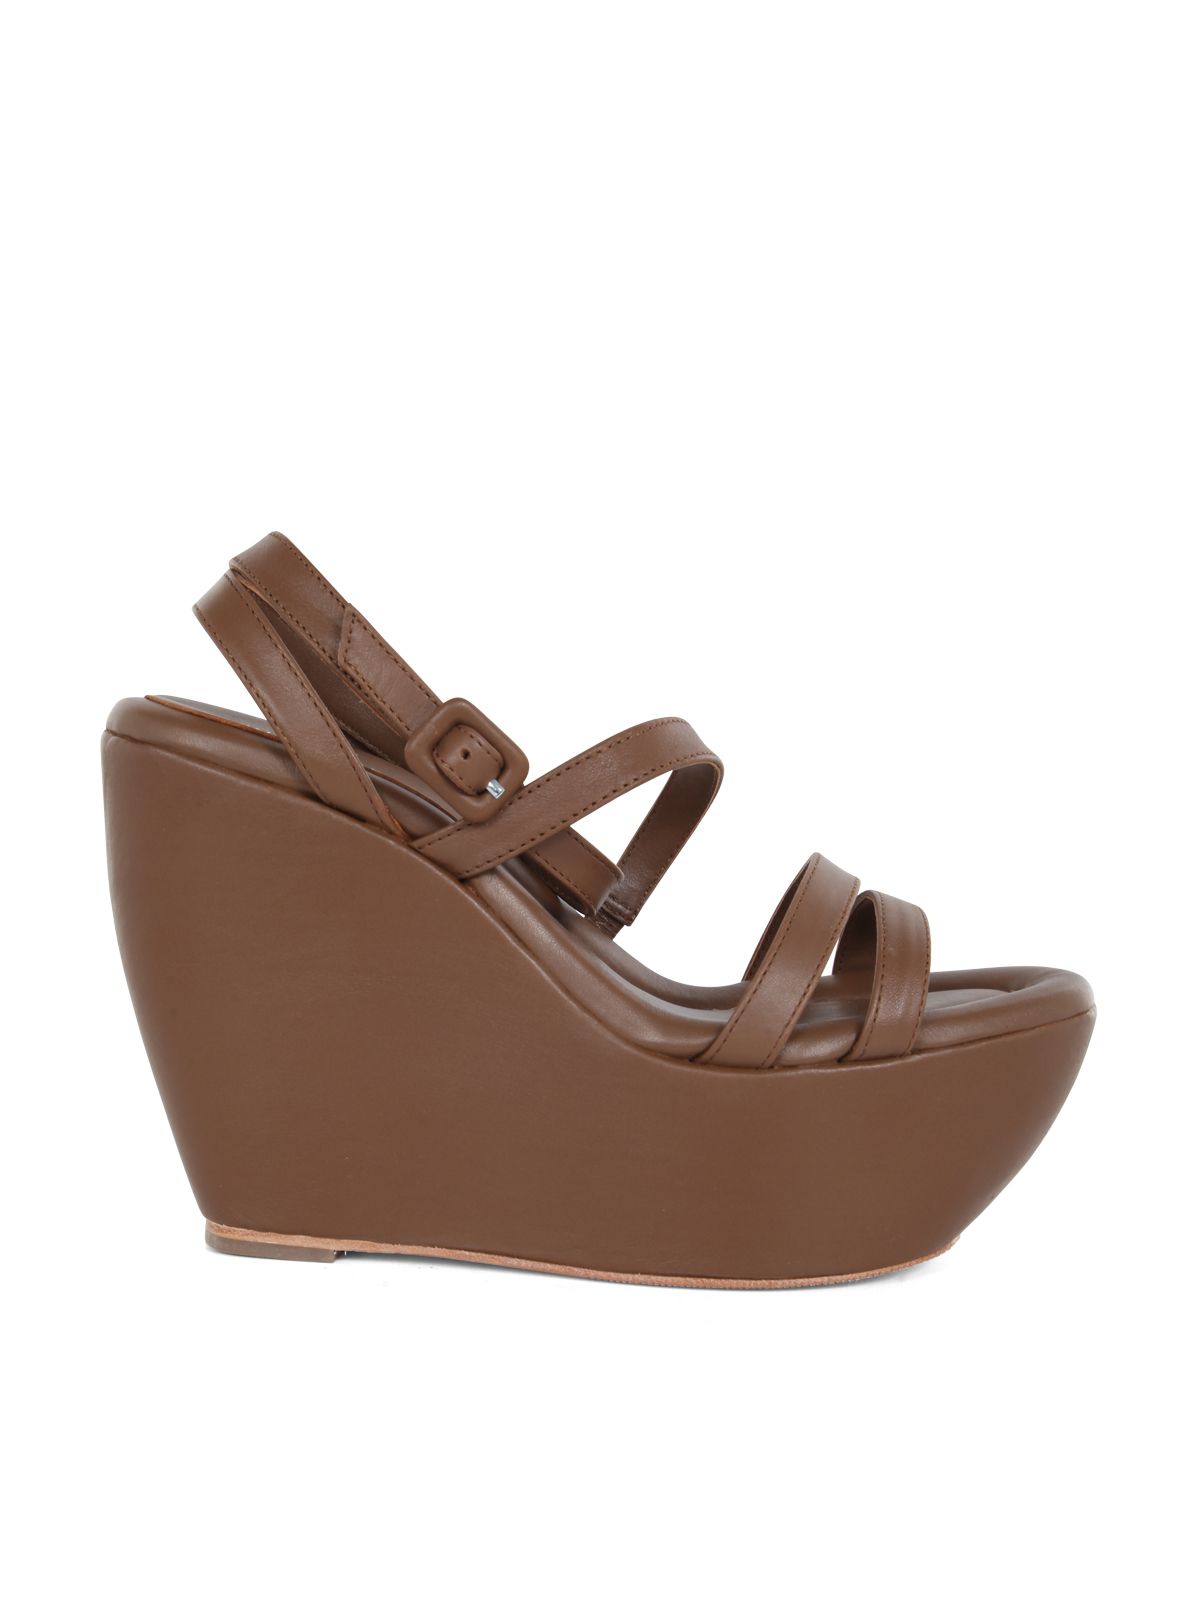 Women's Wedge Sandals W/ankle Bands